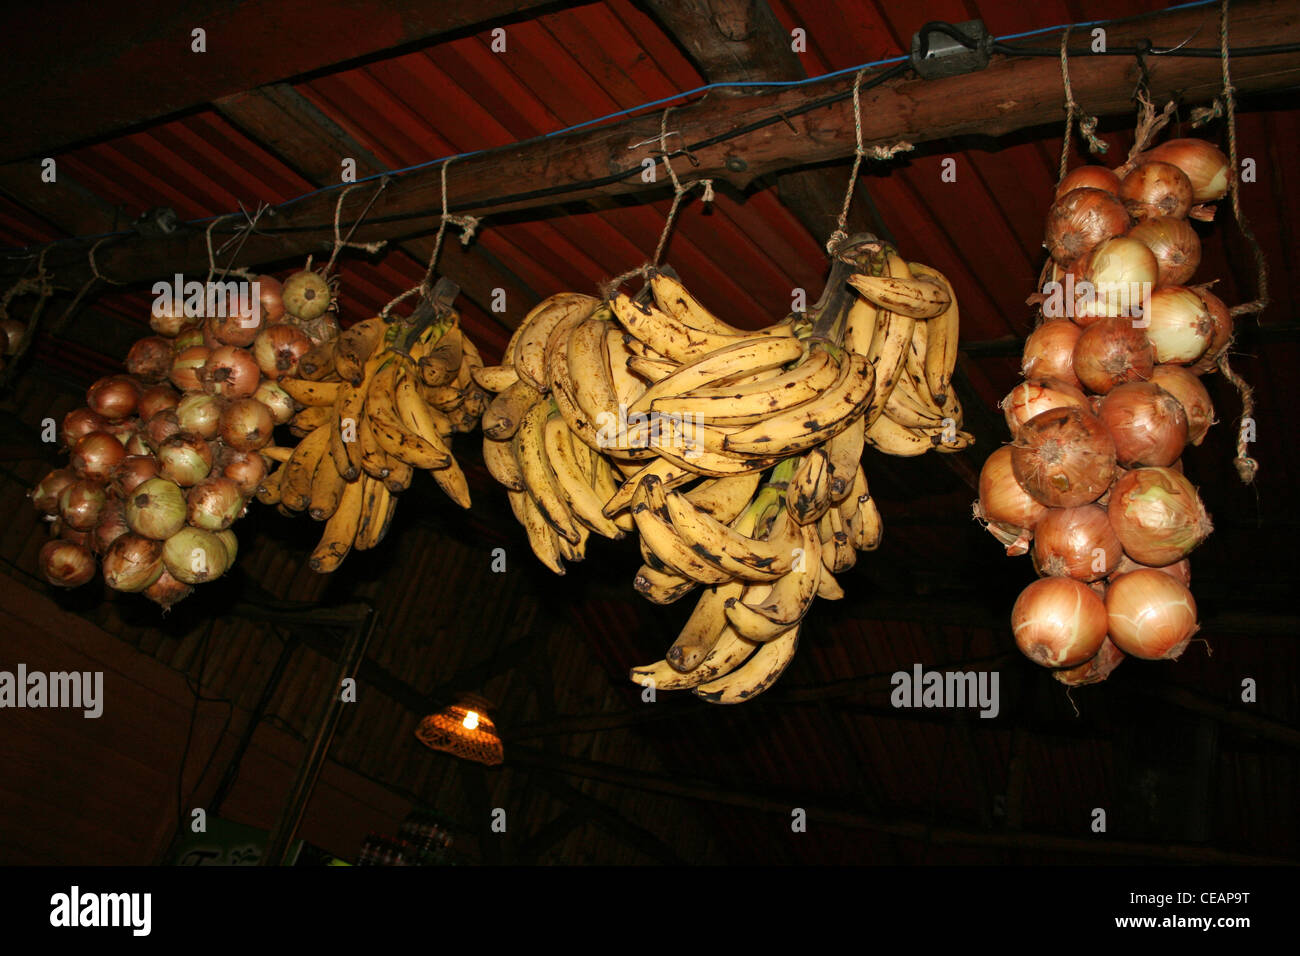 Onions And Bananas Hanging From The Rafters In a Traditional Costa Rica Restuarant Stock Photo